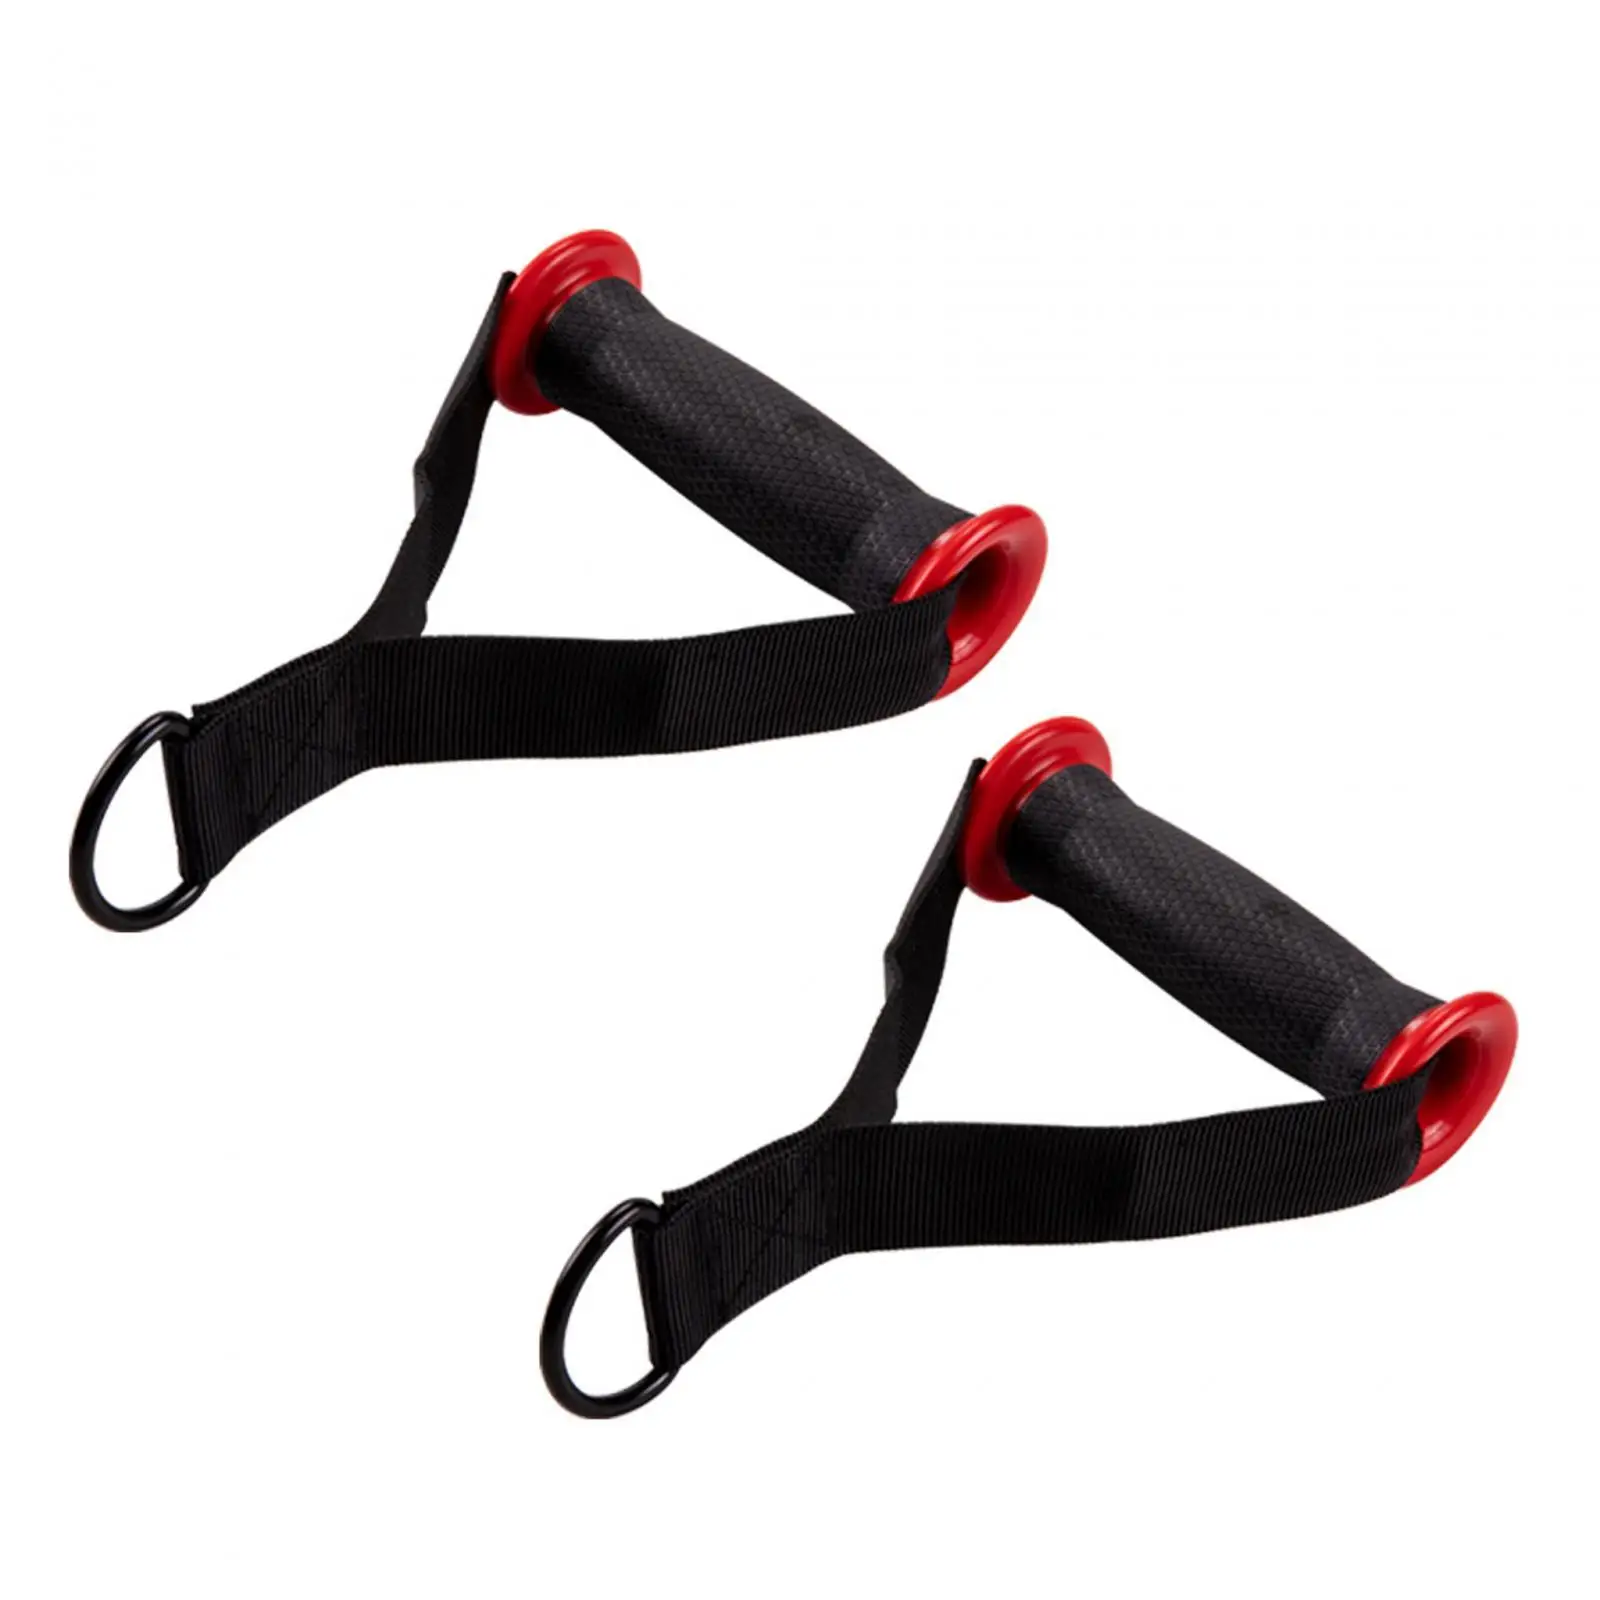 2x Cable Machine Attachment Handles Replacement Grips Workout Gymnastics Hanging Resistance Exercise Strength Pull Handles